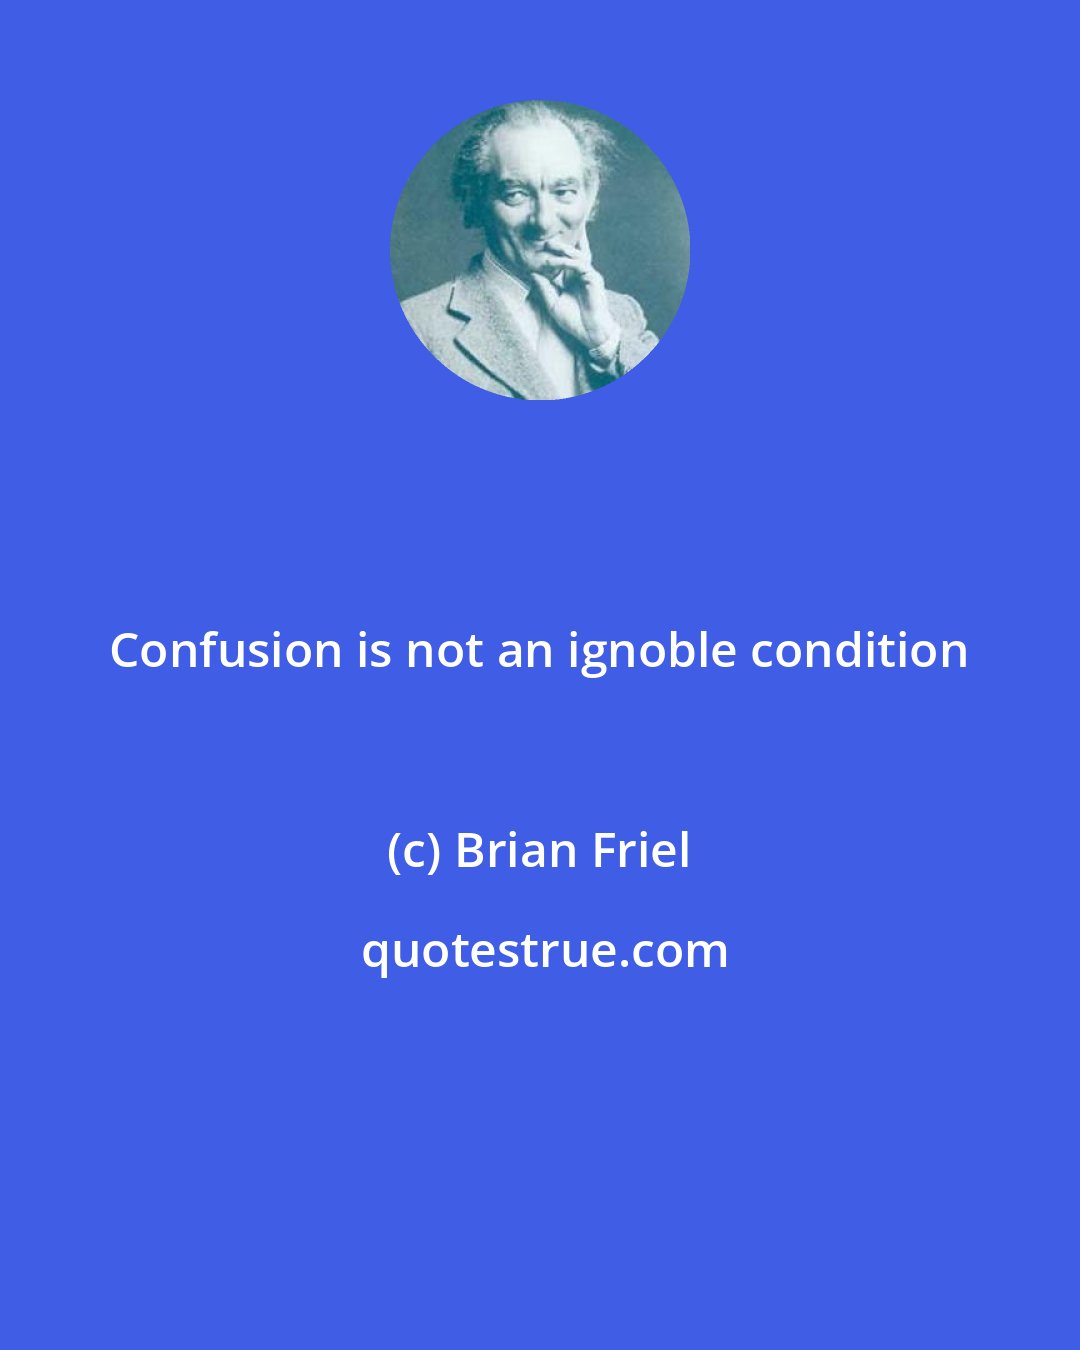 Brian Friel: Confusion is not an ignoble condition